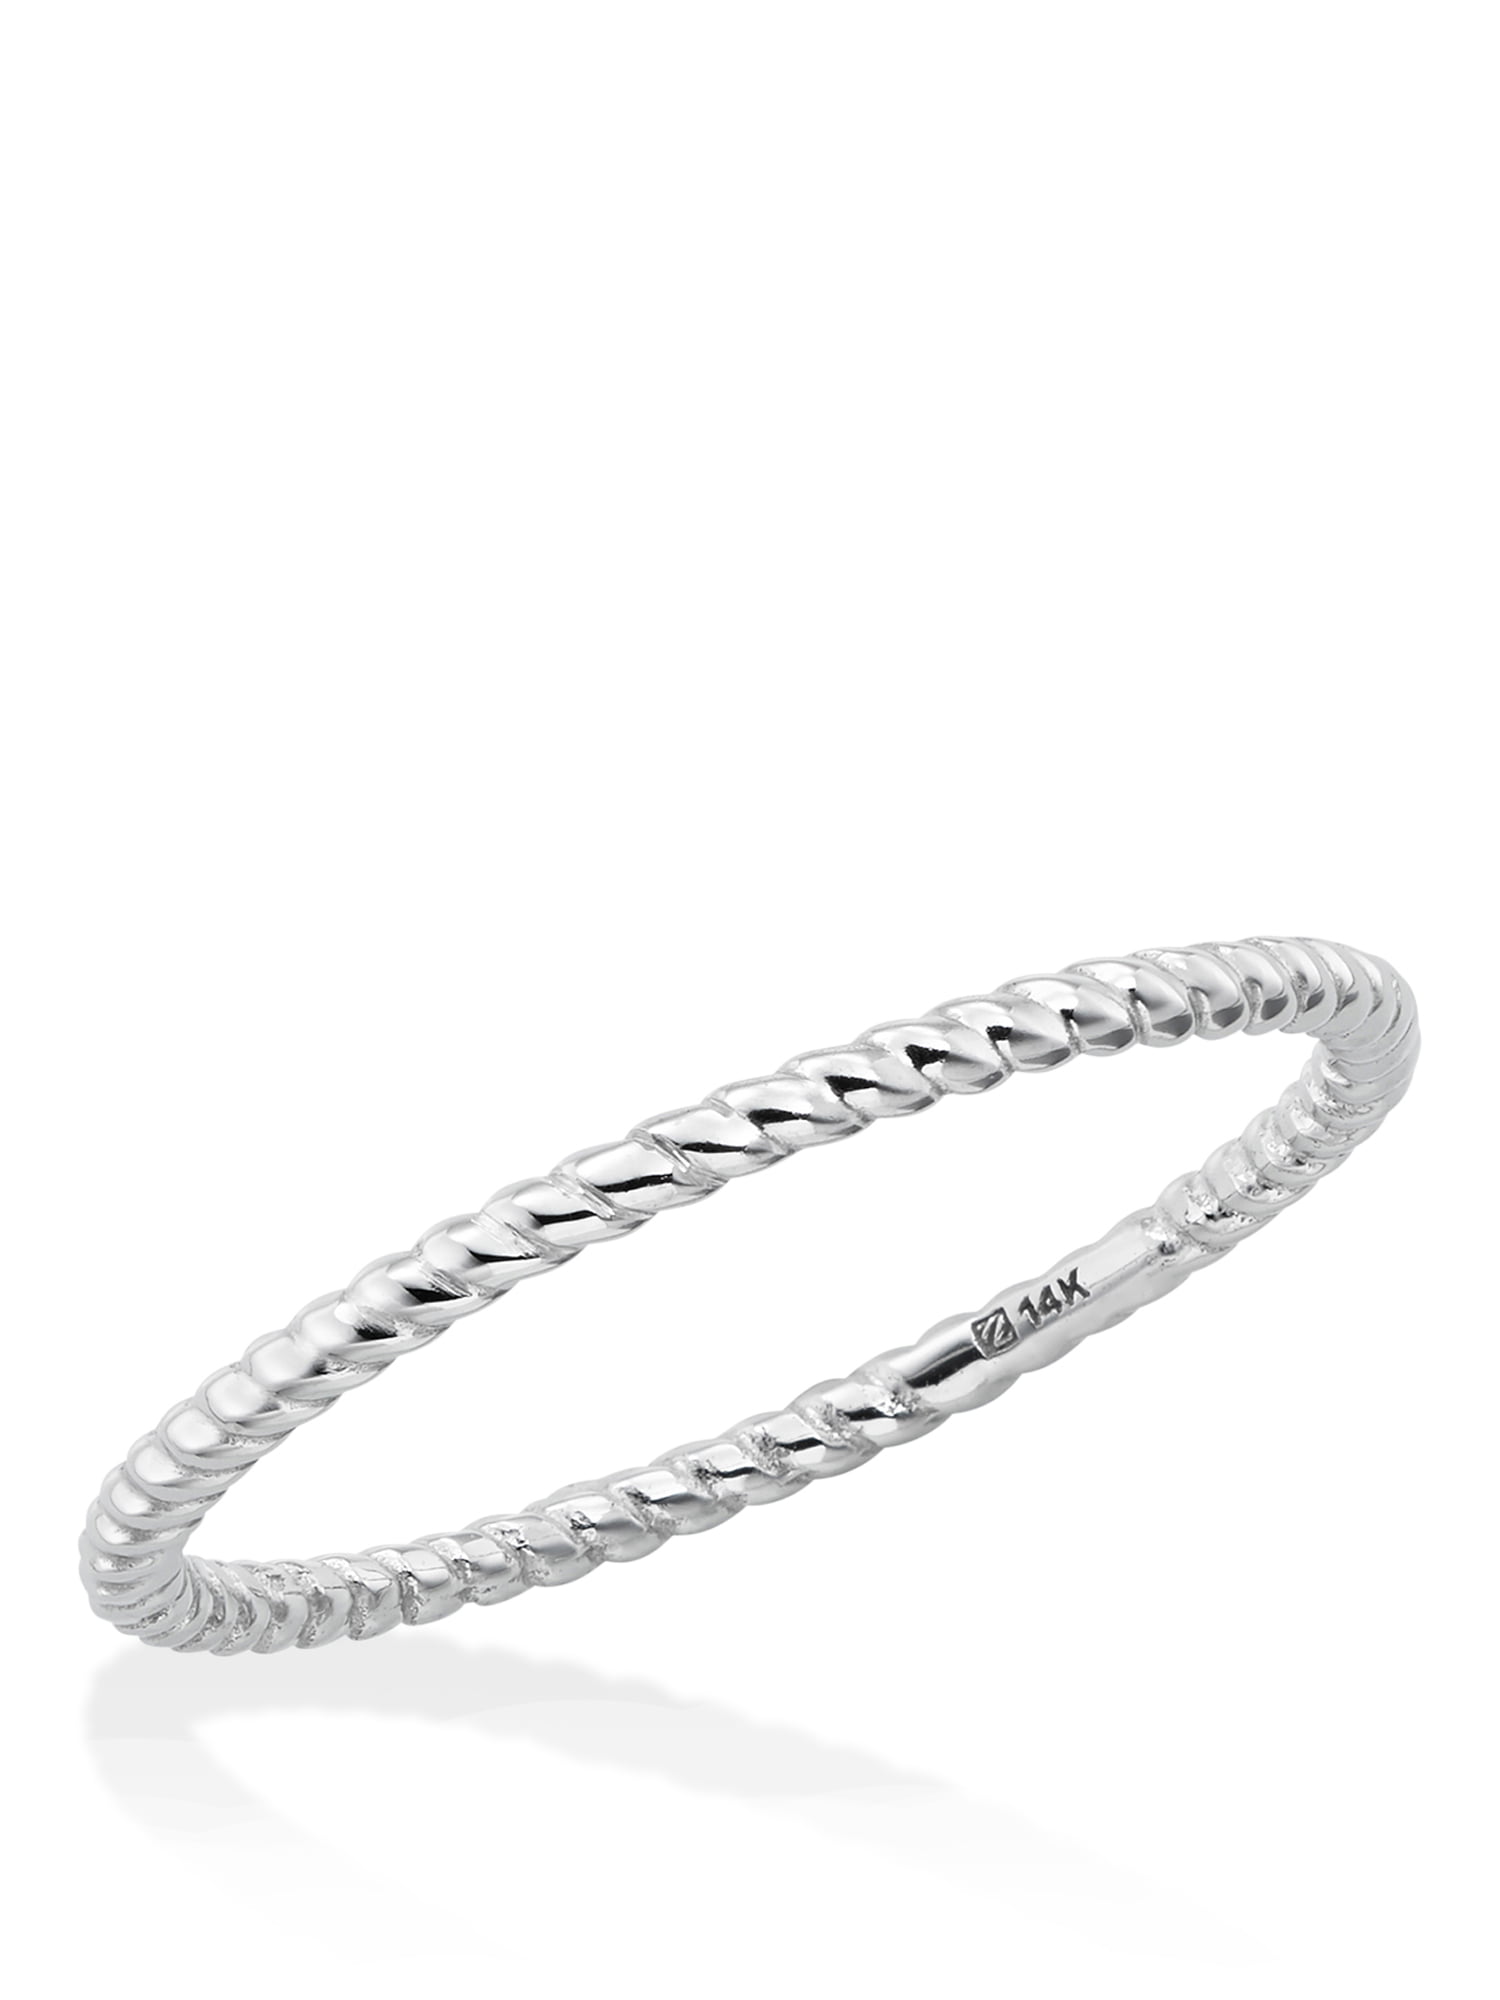 Details about  / 14K White Gold Twisted knuckle Band Ring